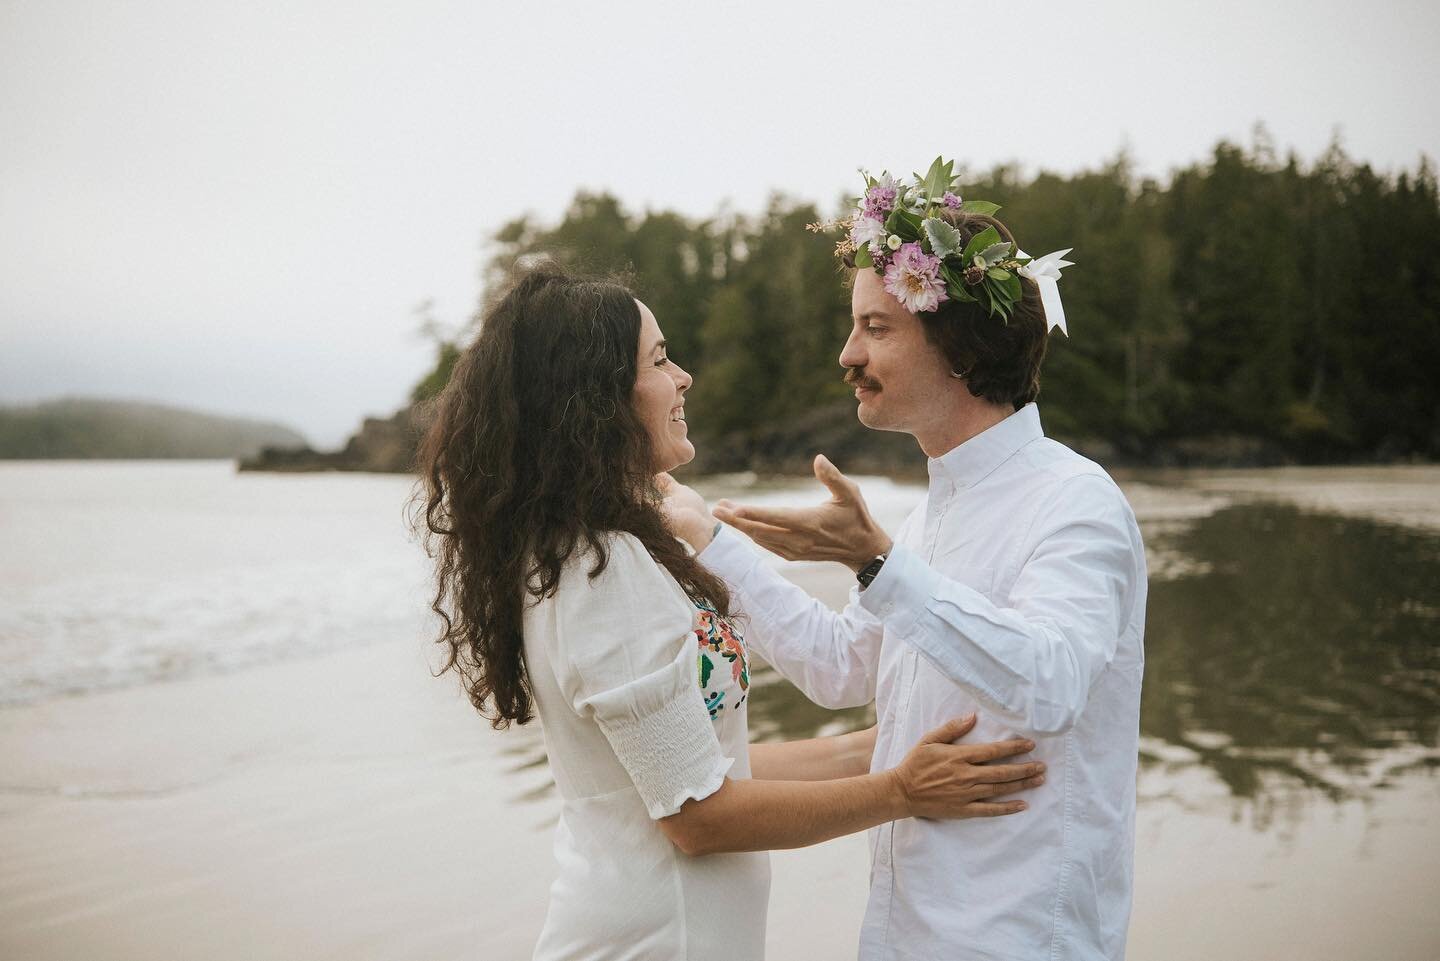 It&rsquo;s flower crown season! Wedding, engagement, bachelorette, baby shower ? There are so many great times to wear a flower crown, even on any old  regular day, because hey, who doesn&rsquo;t love flower crowns !?
Photo credit to the talented: @w